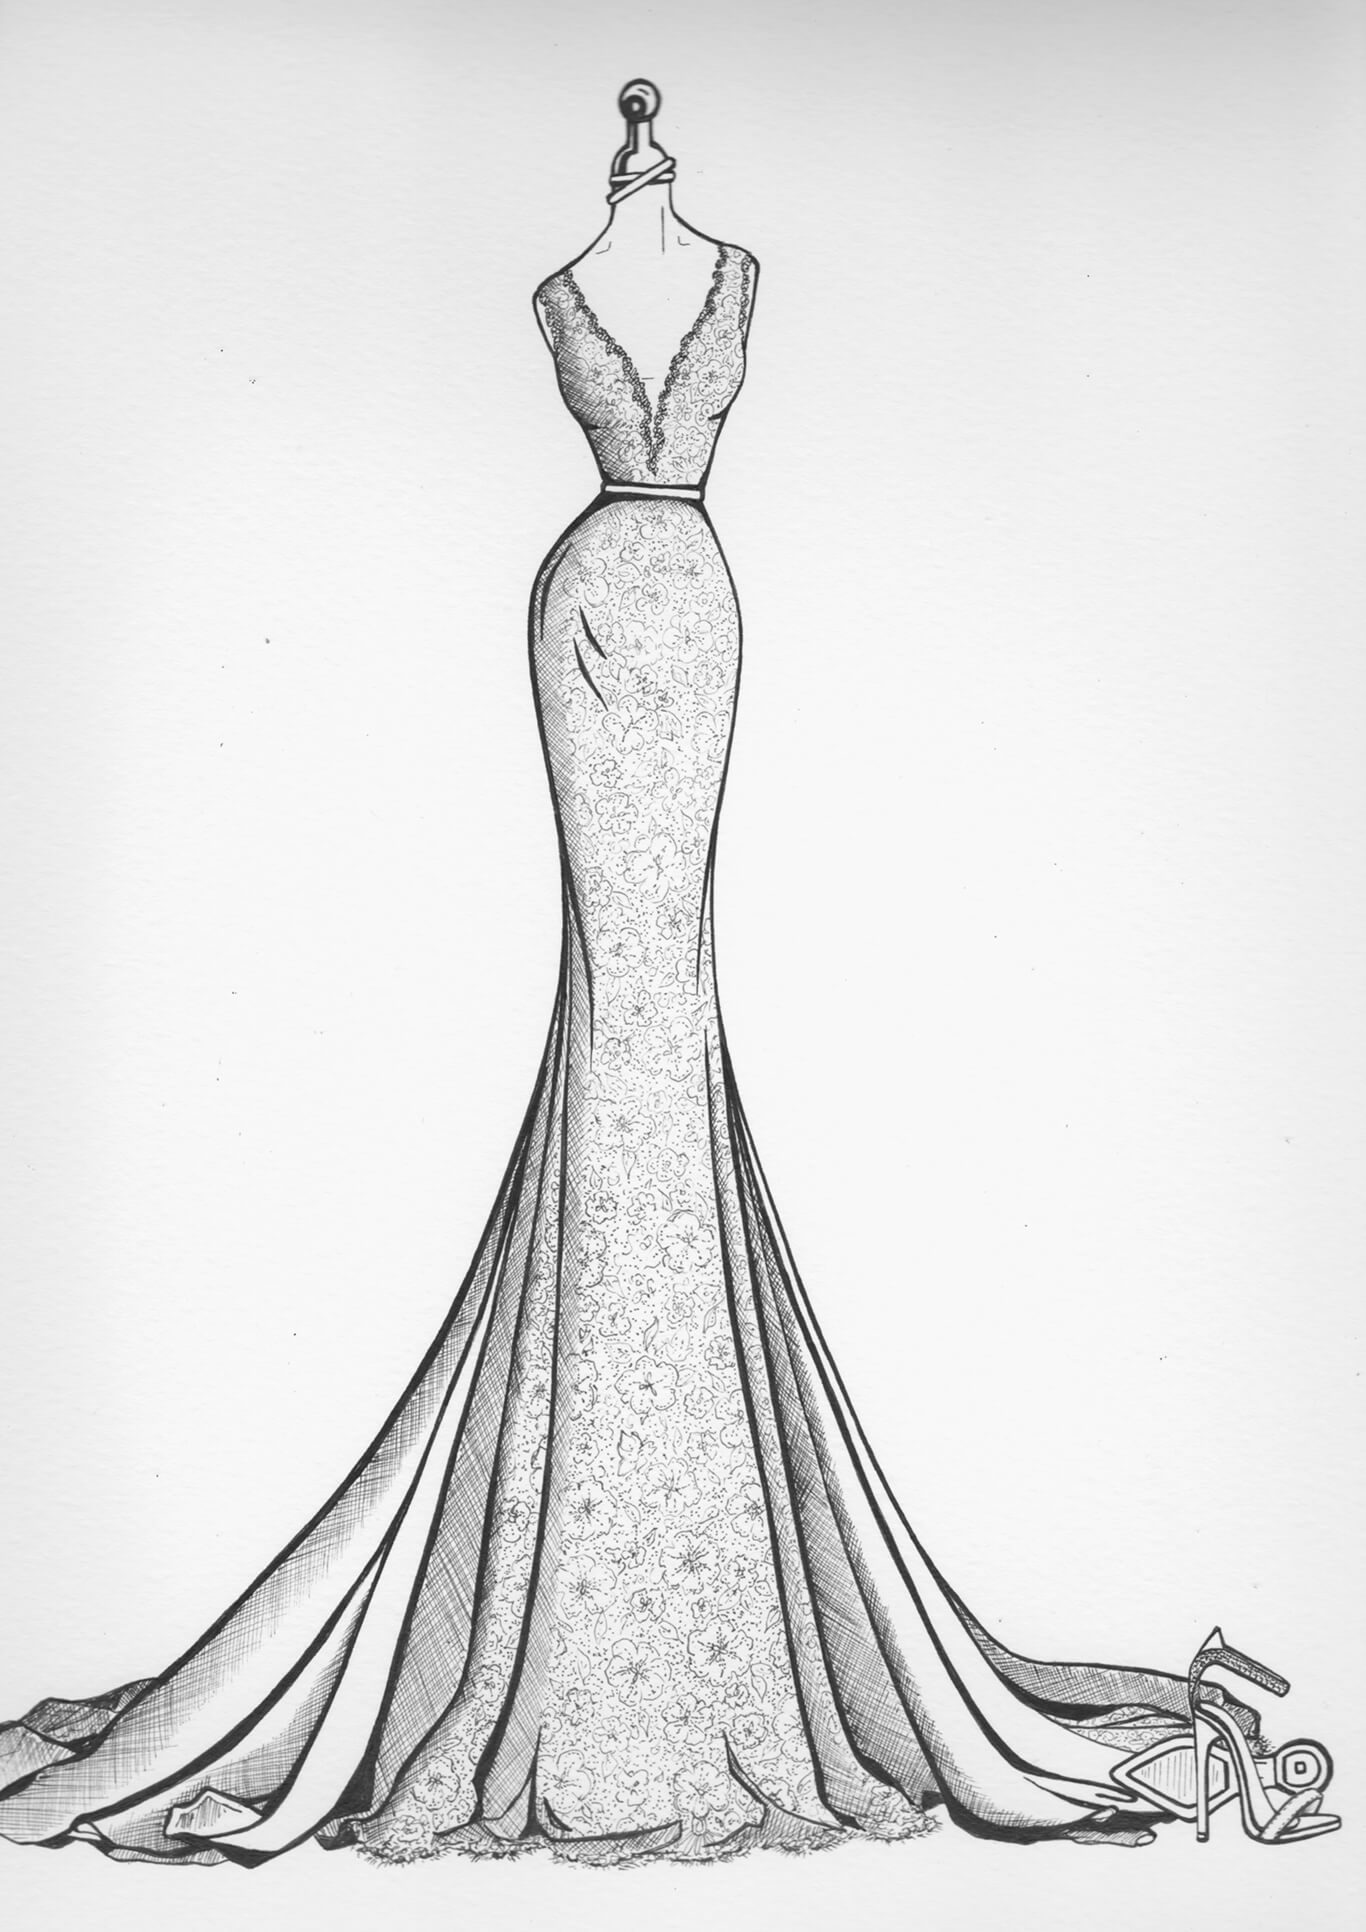 Dress Design Drawing  How To Draw A Dress Design Step By Step